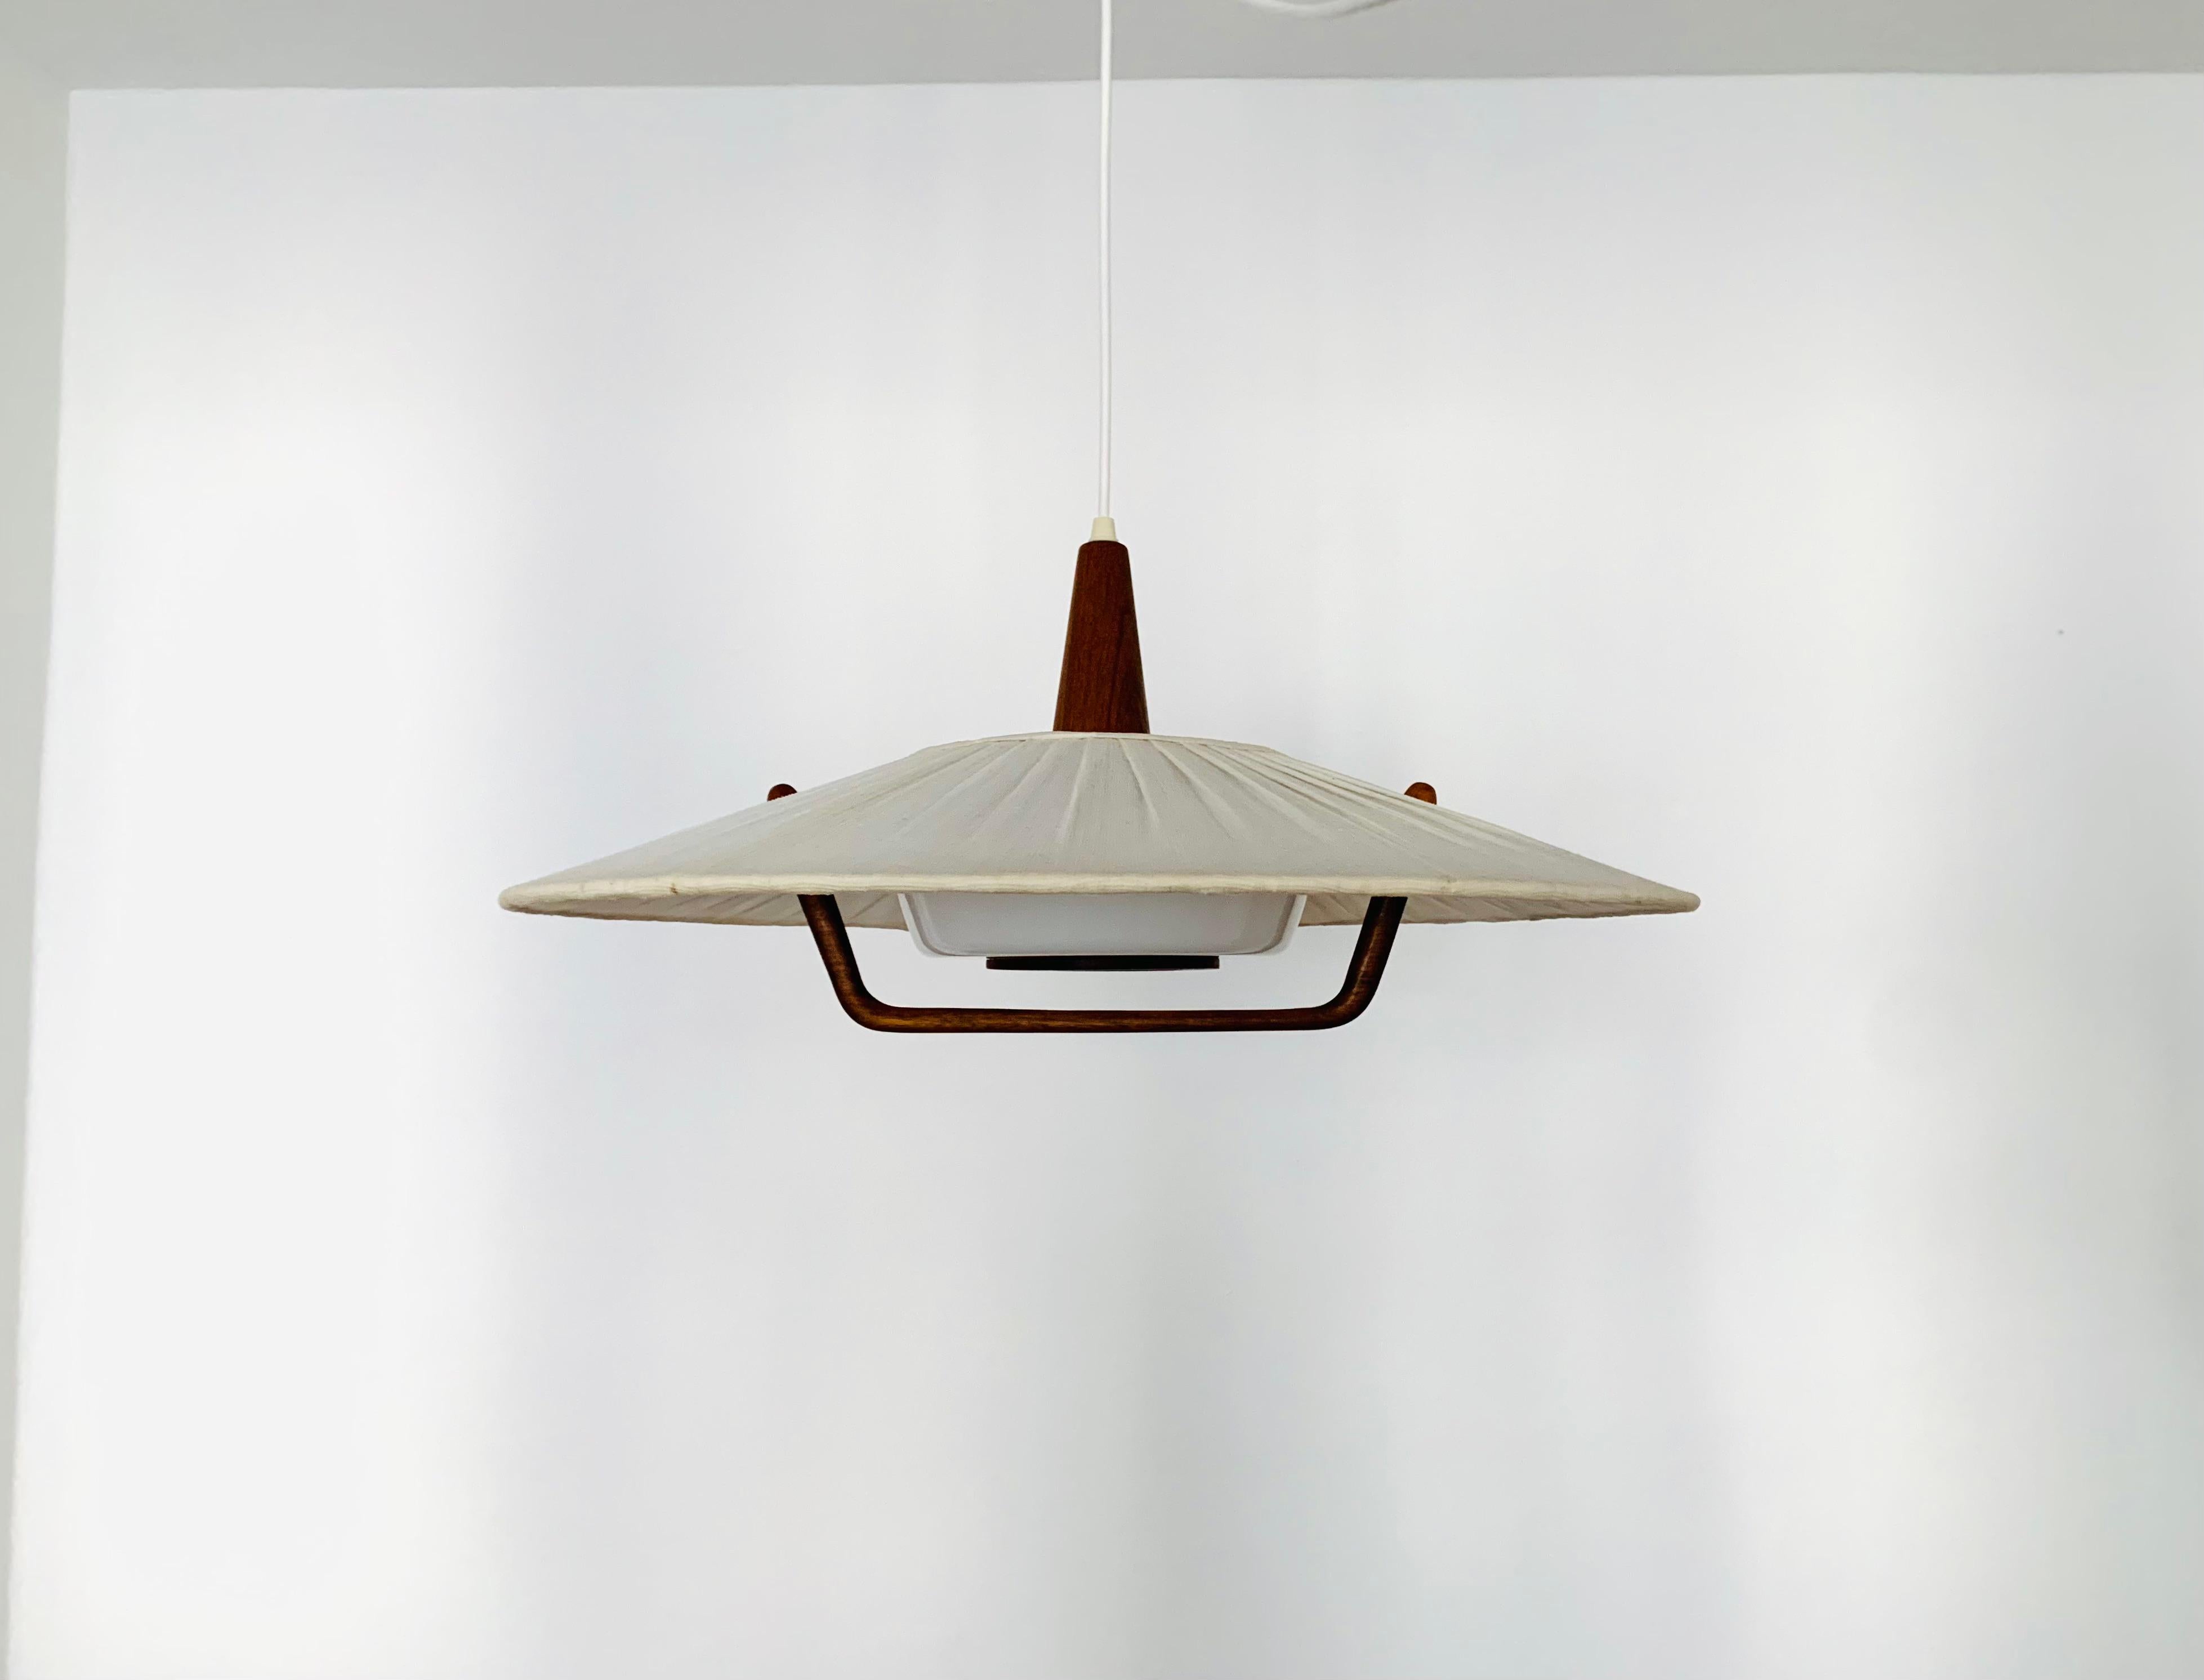 Exceptionally beautiful and large pendant lamp from the 1960s.
The design is very unusual.
The shape and the materials create a warm and very pleasant light.

Condition:

Very good vintage condition with slight signs of wear consistent with